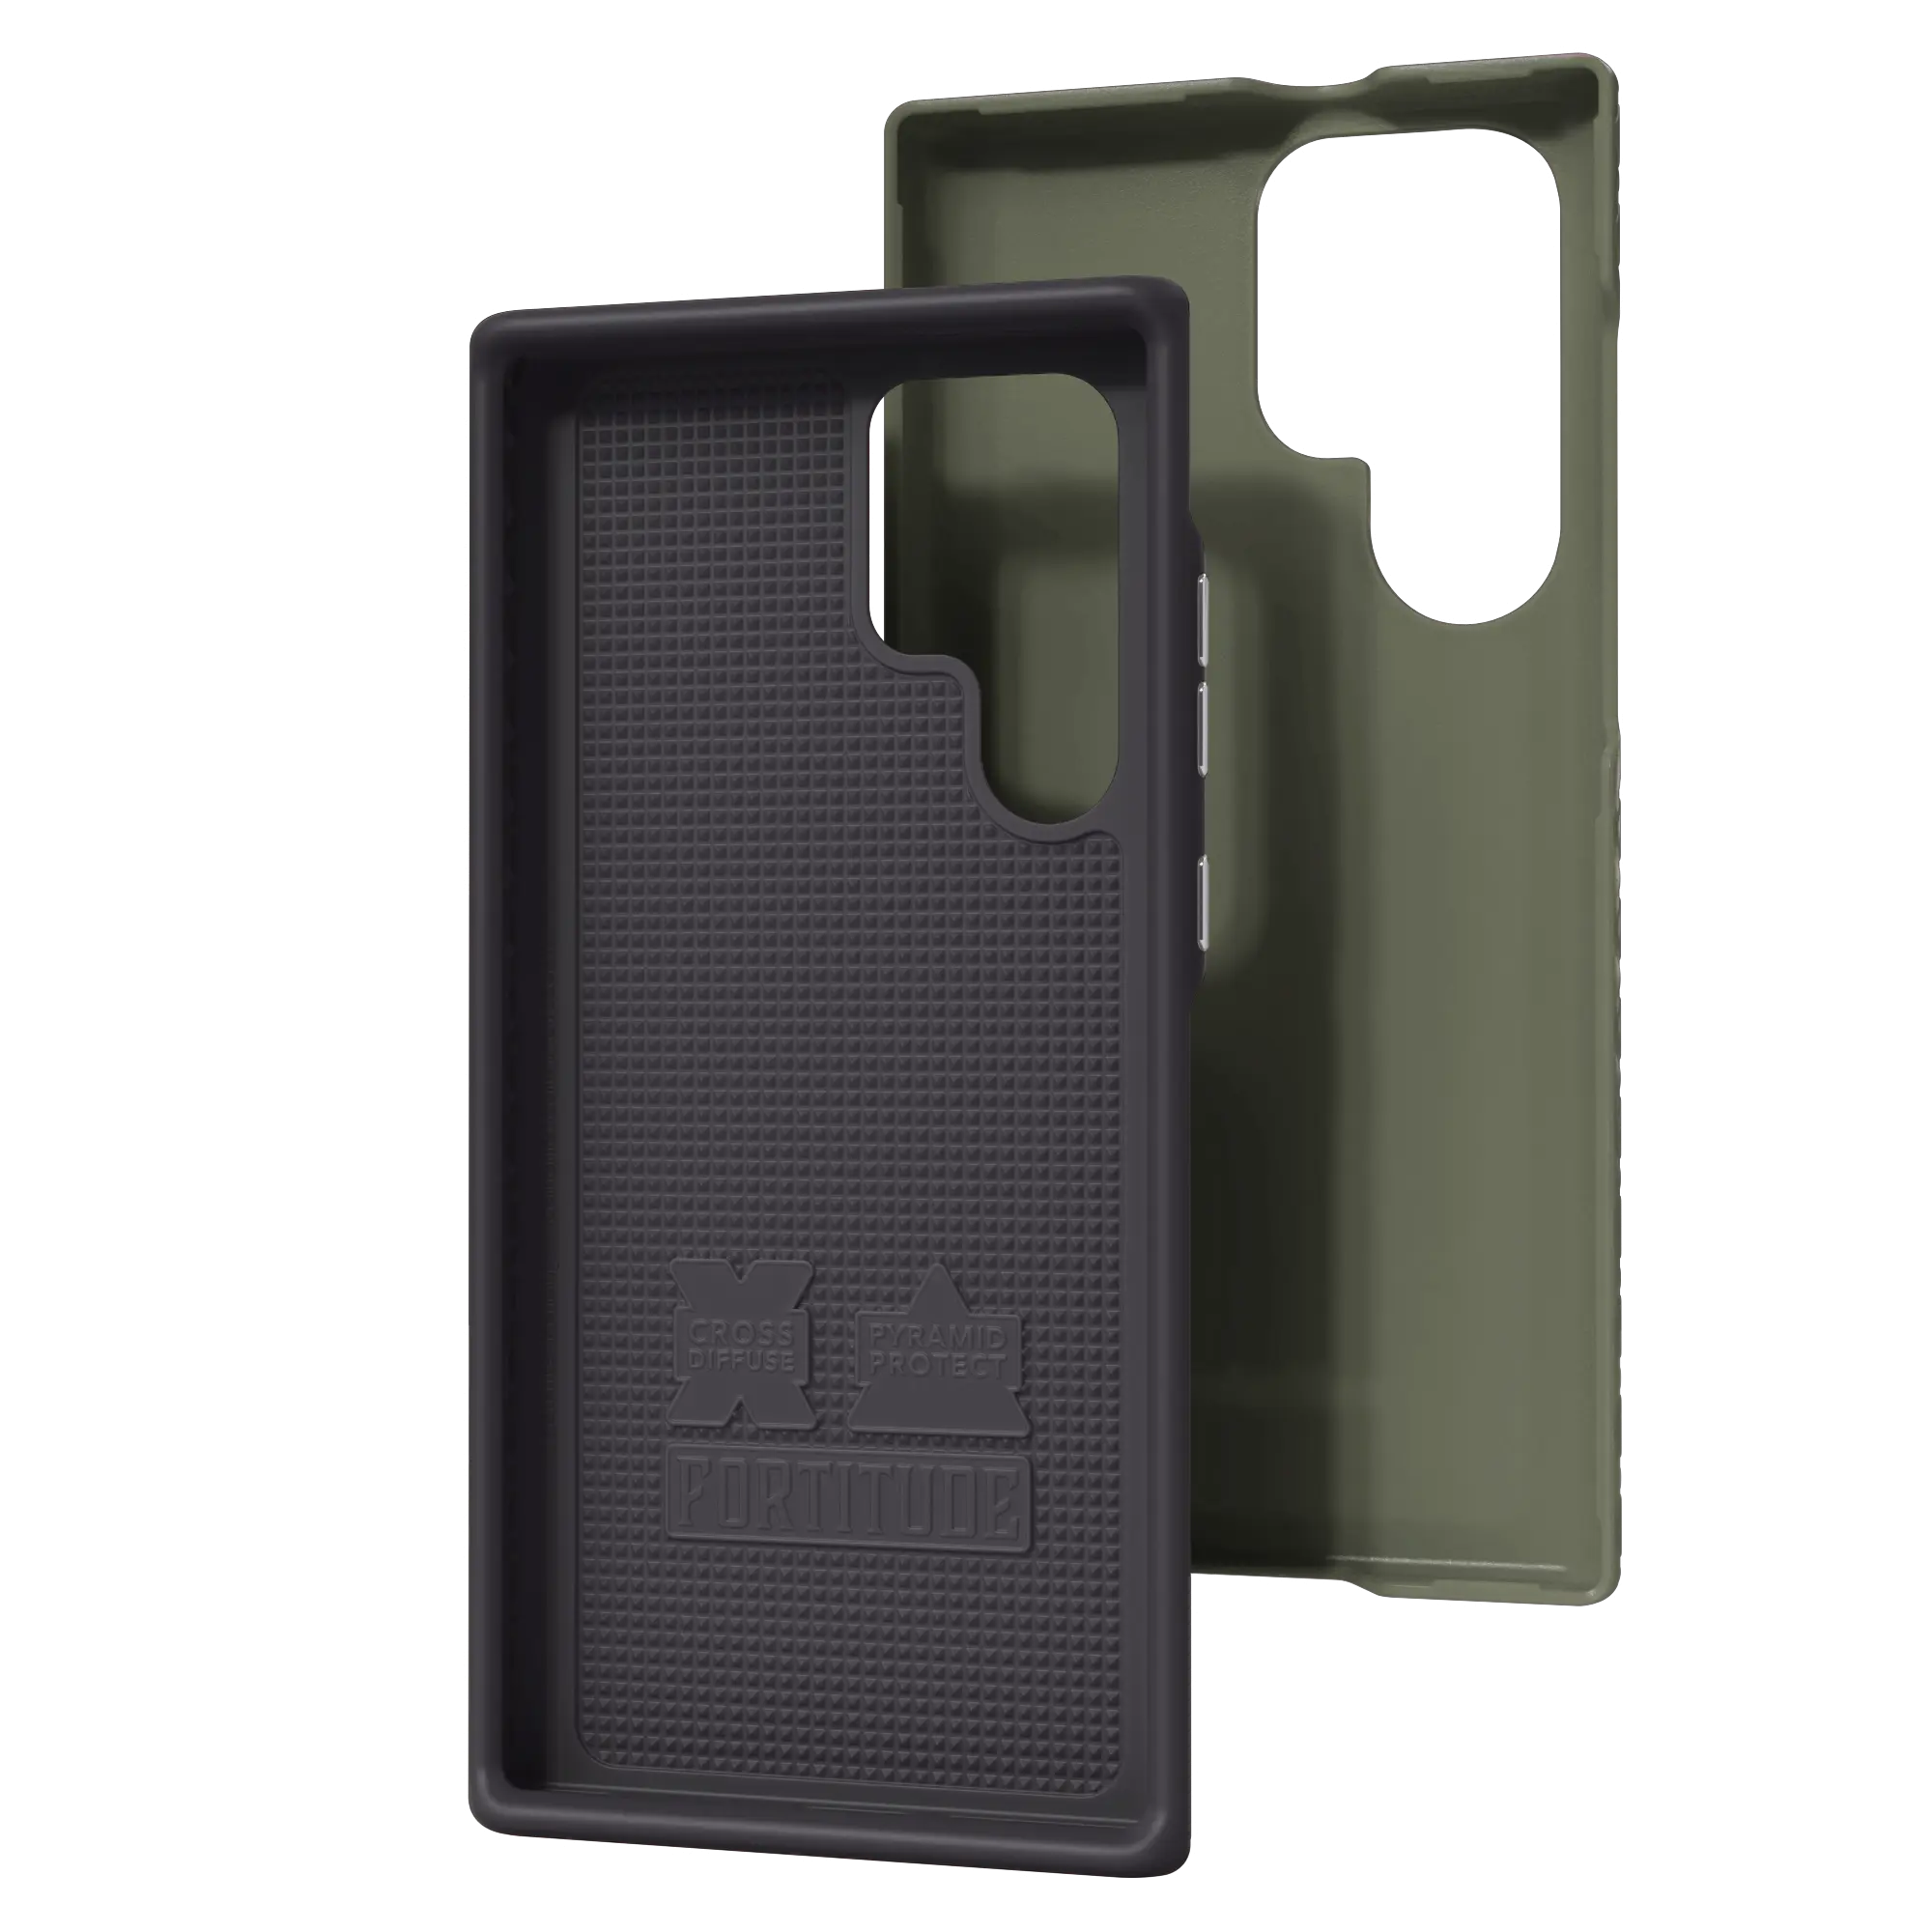 Fortitude Series for Samsung Galaxy S22 ULTRA 5G - Olive Drab Green - Case -  - cellhelmet